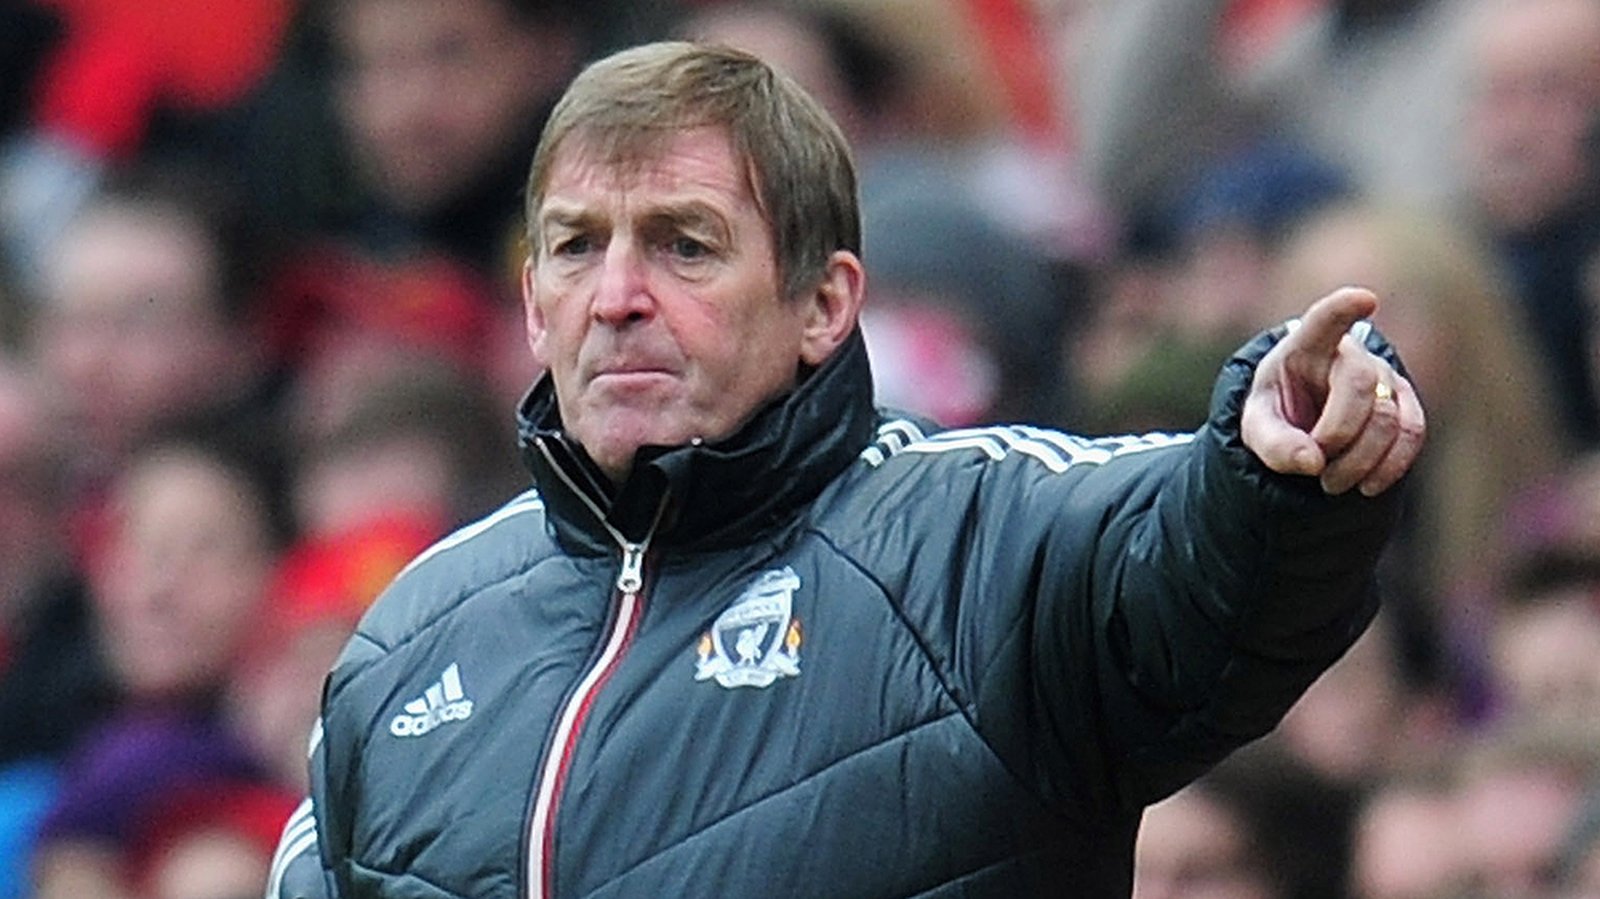 Liverpool great Kenny Dalglish accepts knighthood